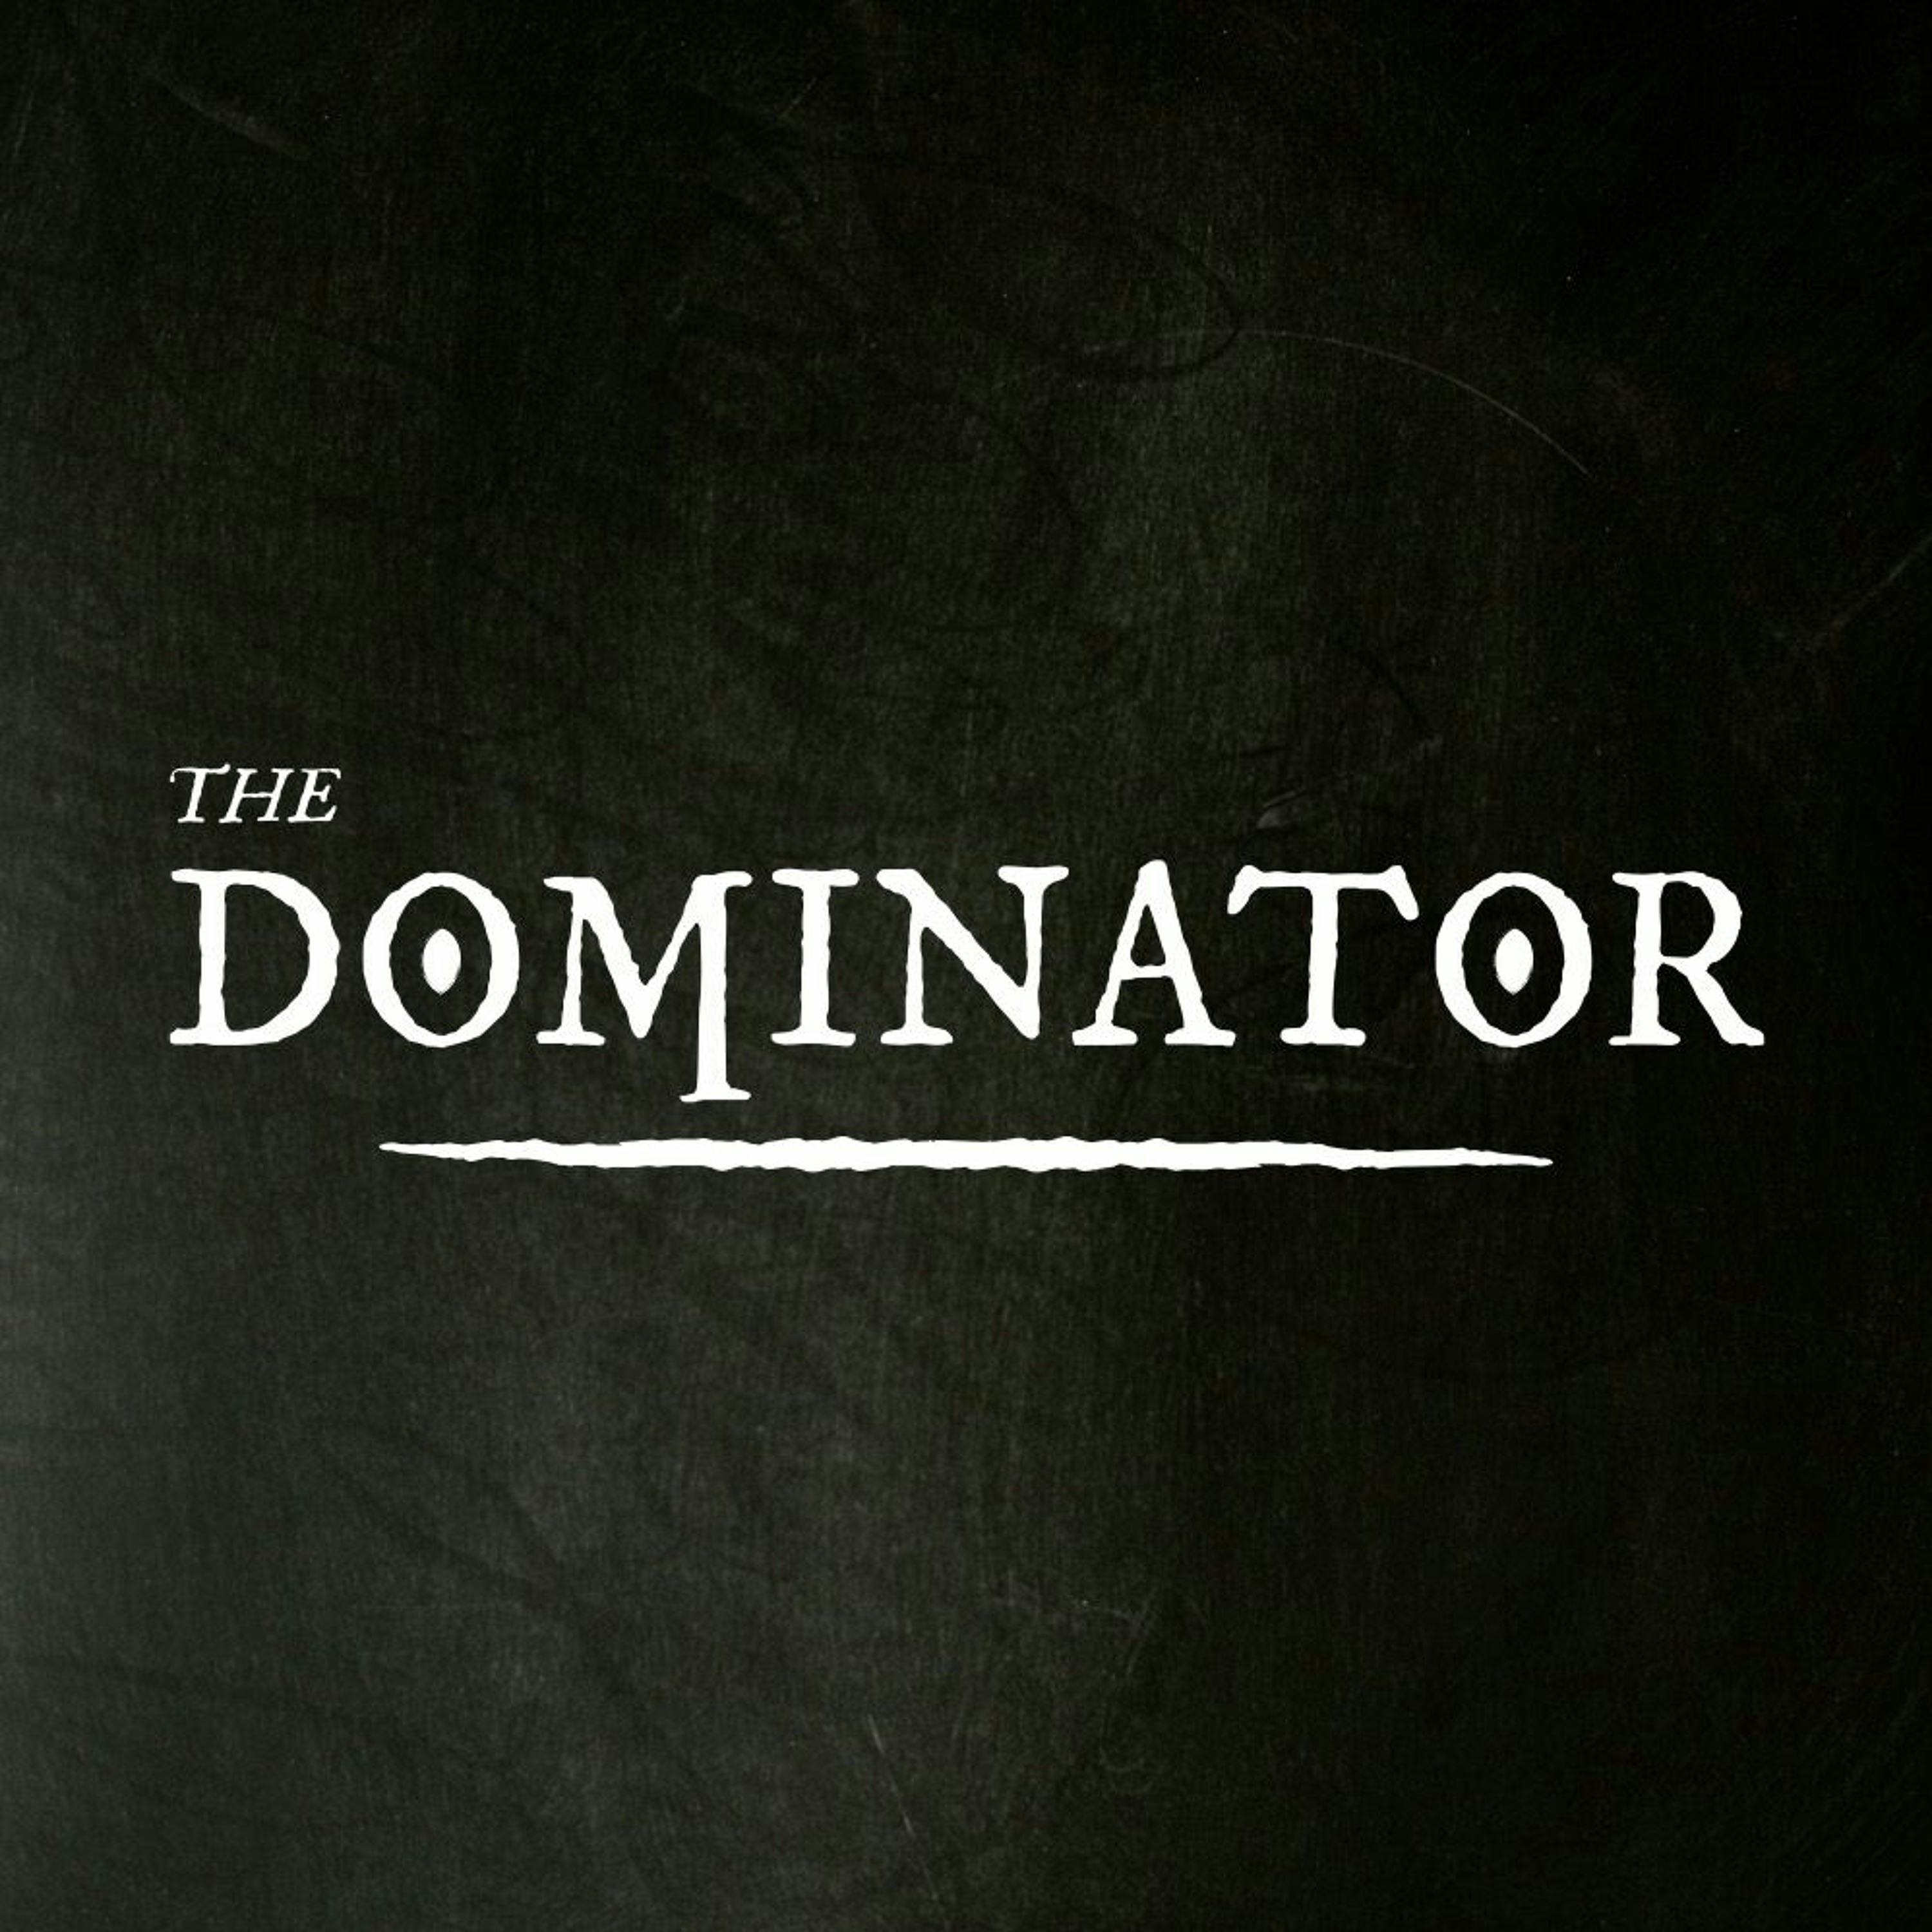 Introducing: The Dominator